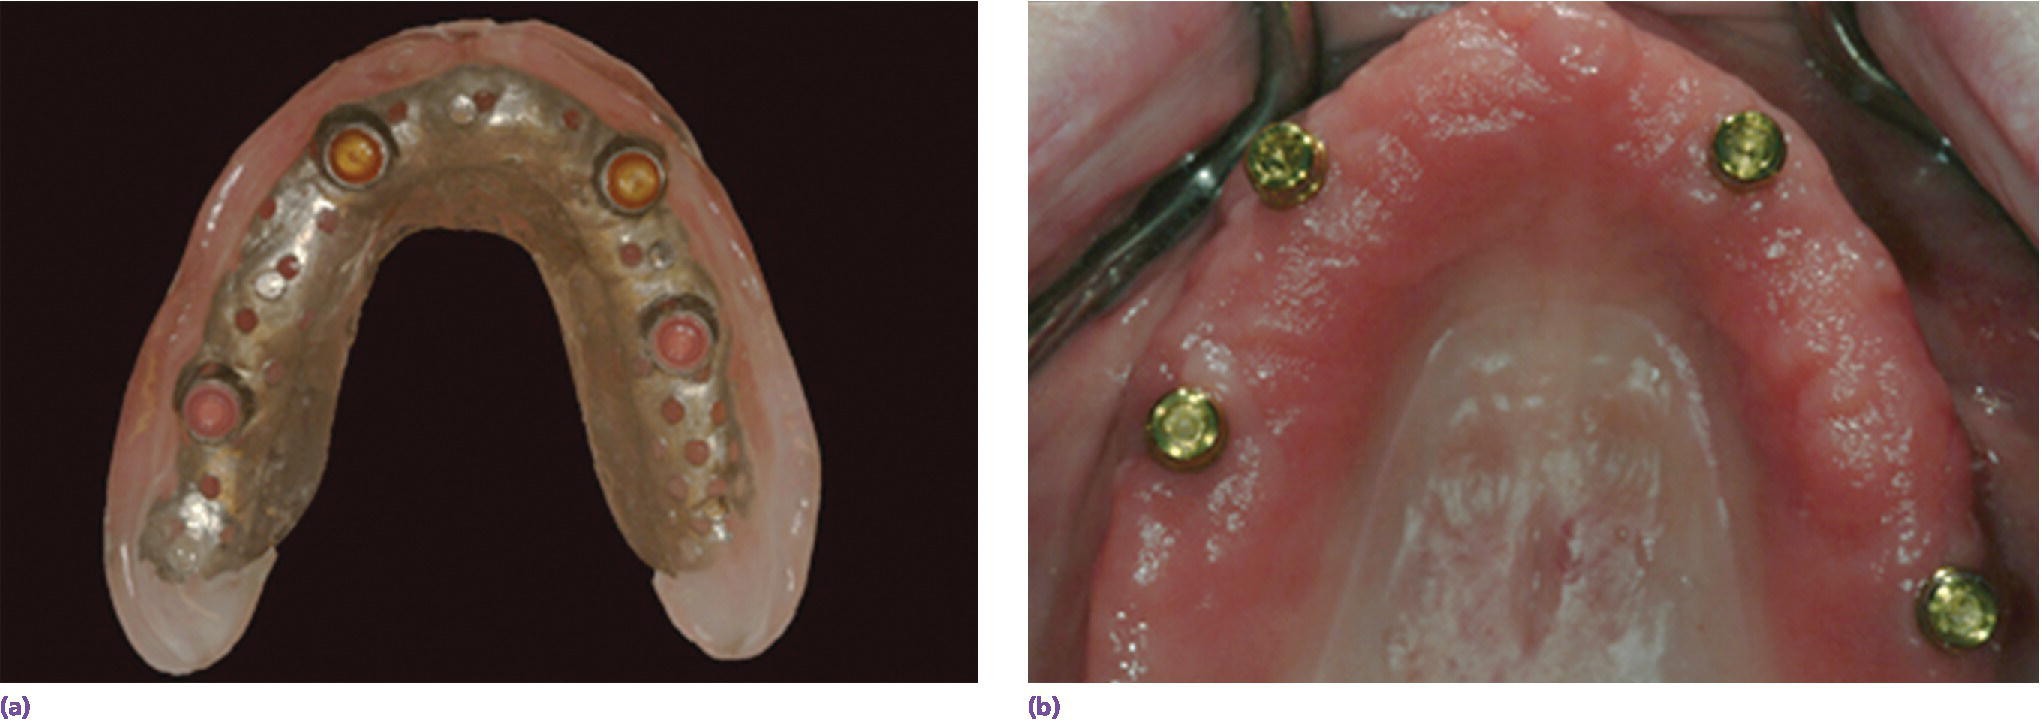 Photos of design of overdenture with reduced palatal coverage and metal-reinforced base (left) and stud abutments well spaced with potential for servicing (right).